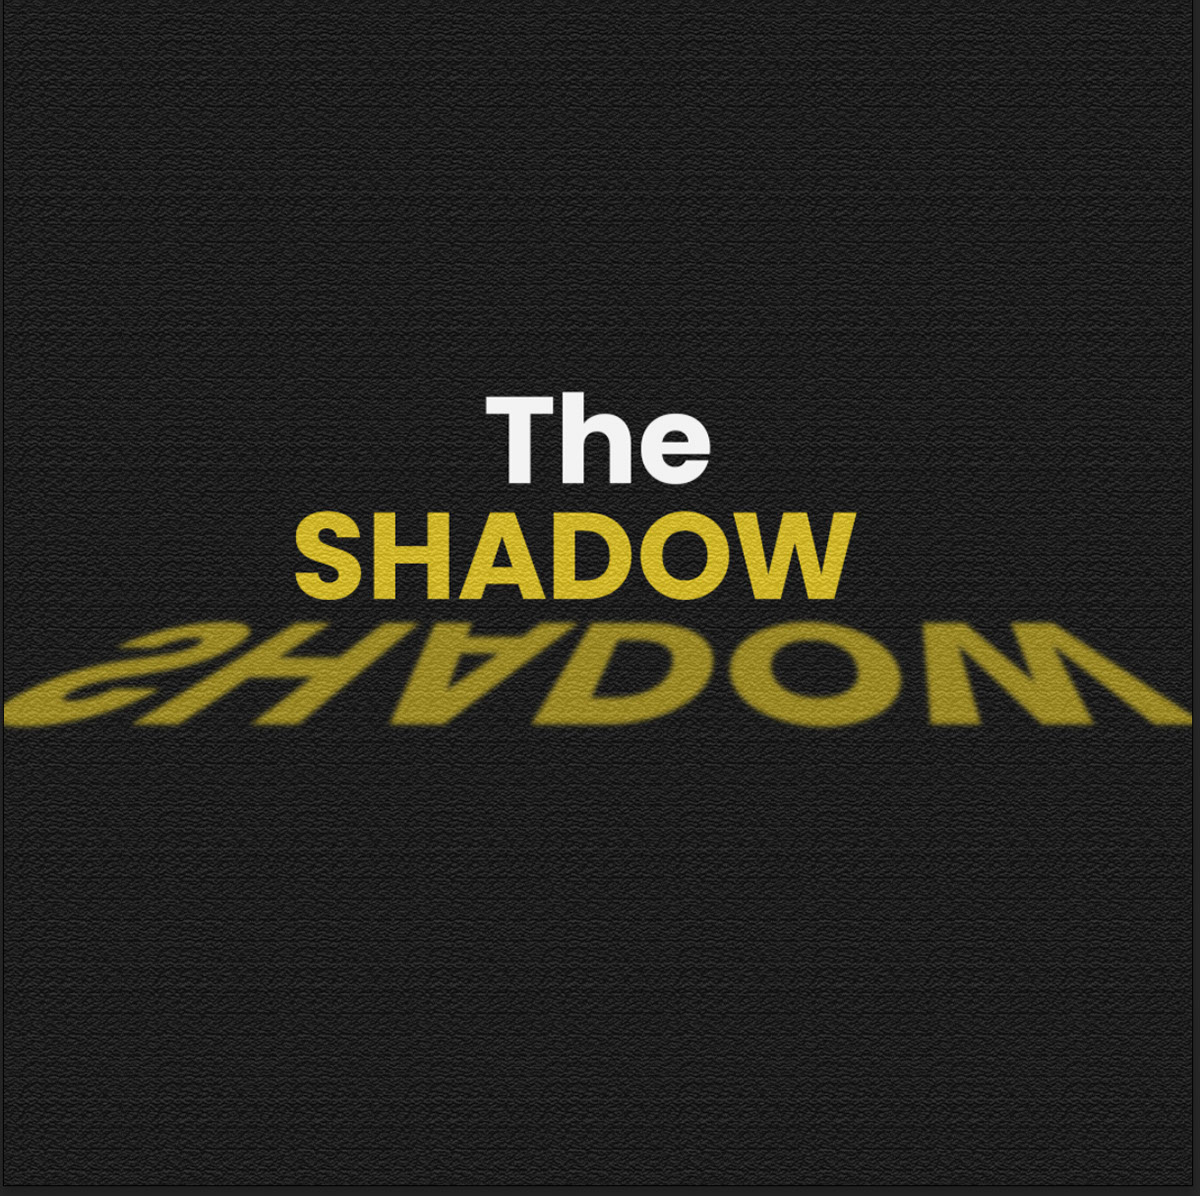 The shadow effect rendition image